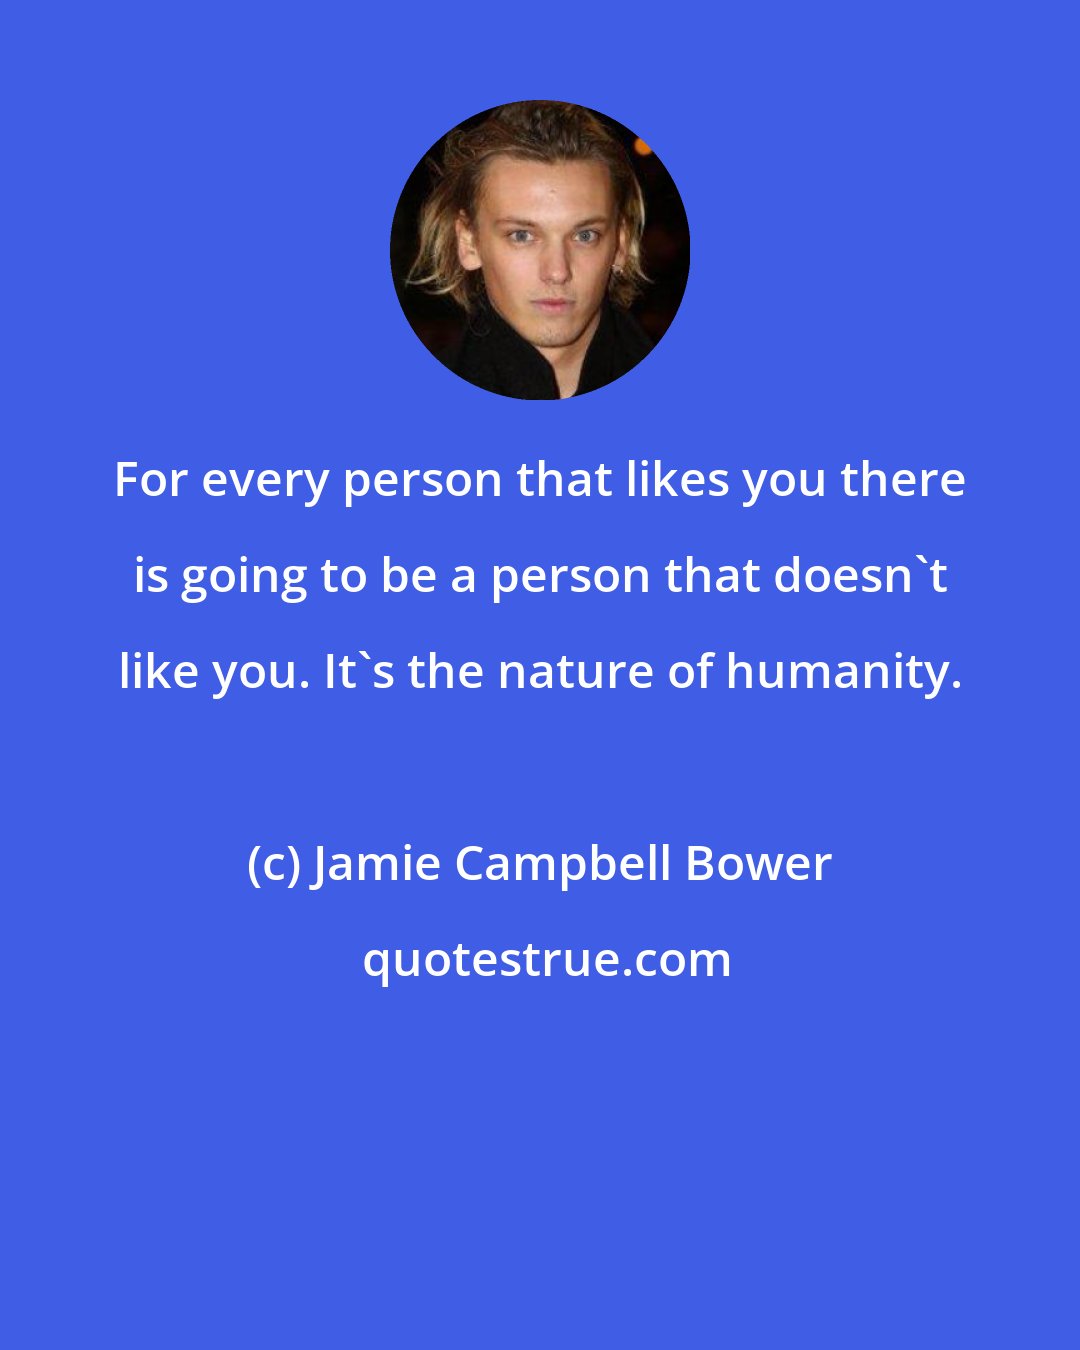 Jamie Campbell Bower: For every person that likes you there is going to be a person that doesn't like you. It's the nature of humanity.